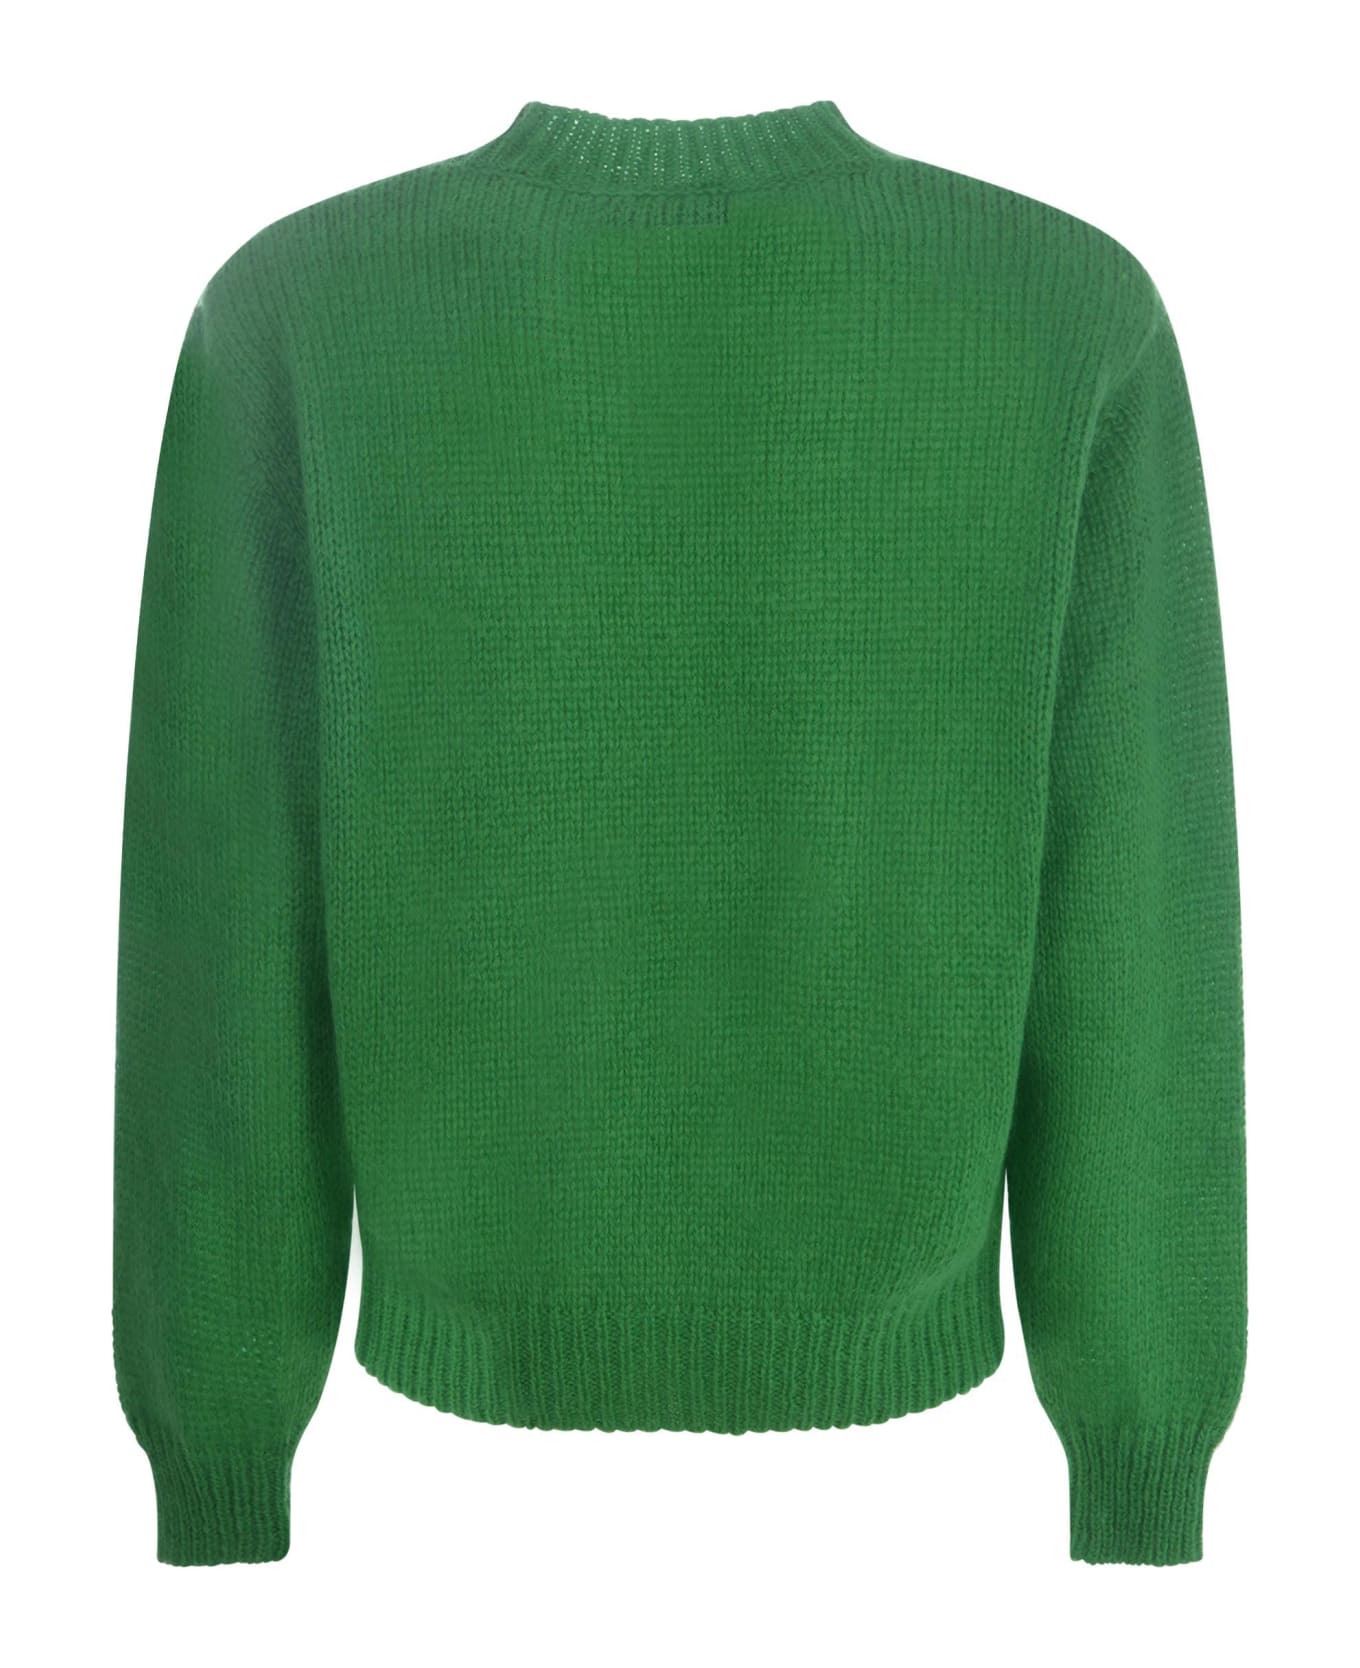 REPRESENT Sweater Represent In Mohair And Wool Blend - Verde